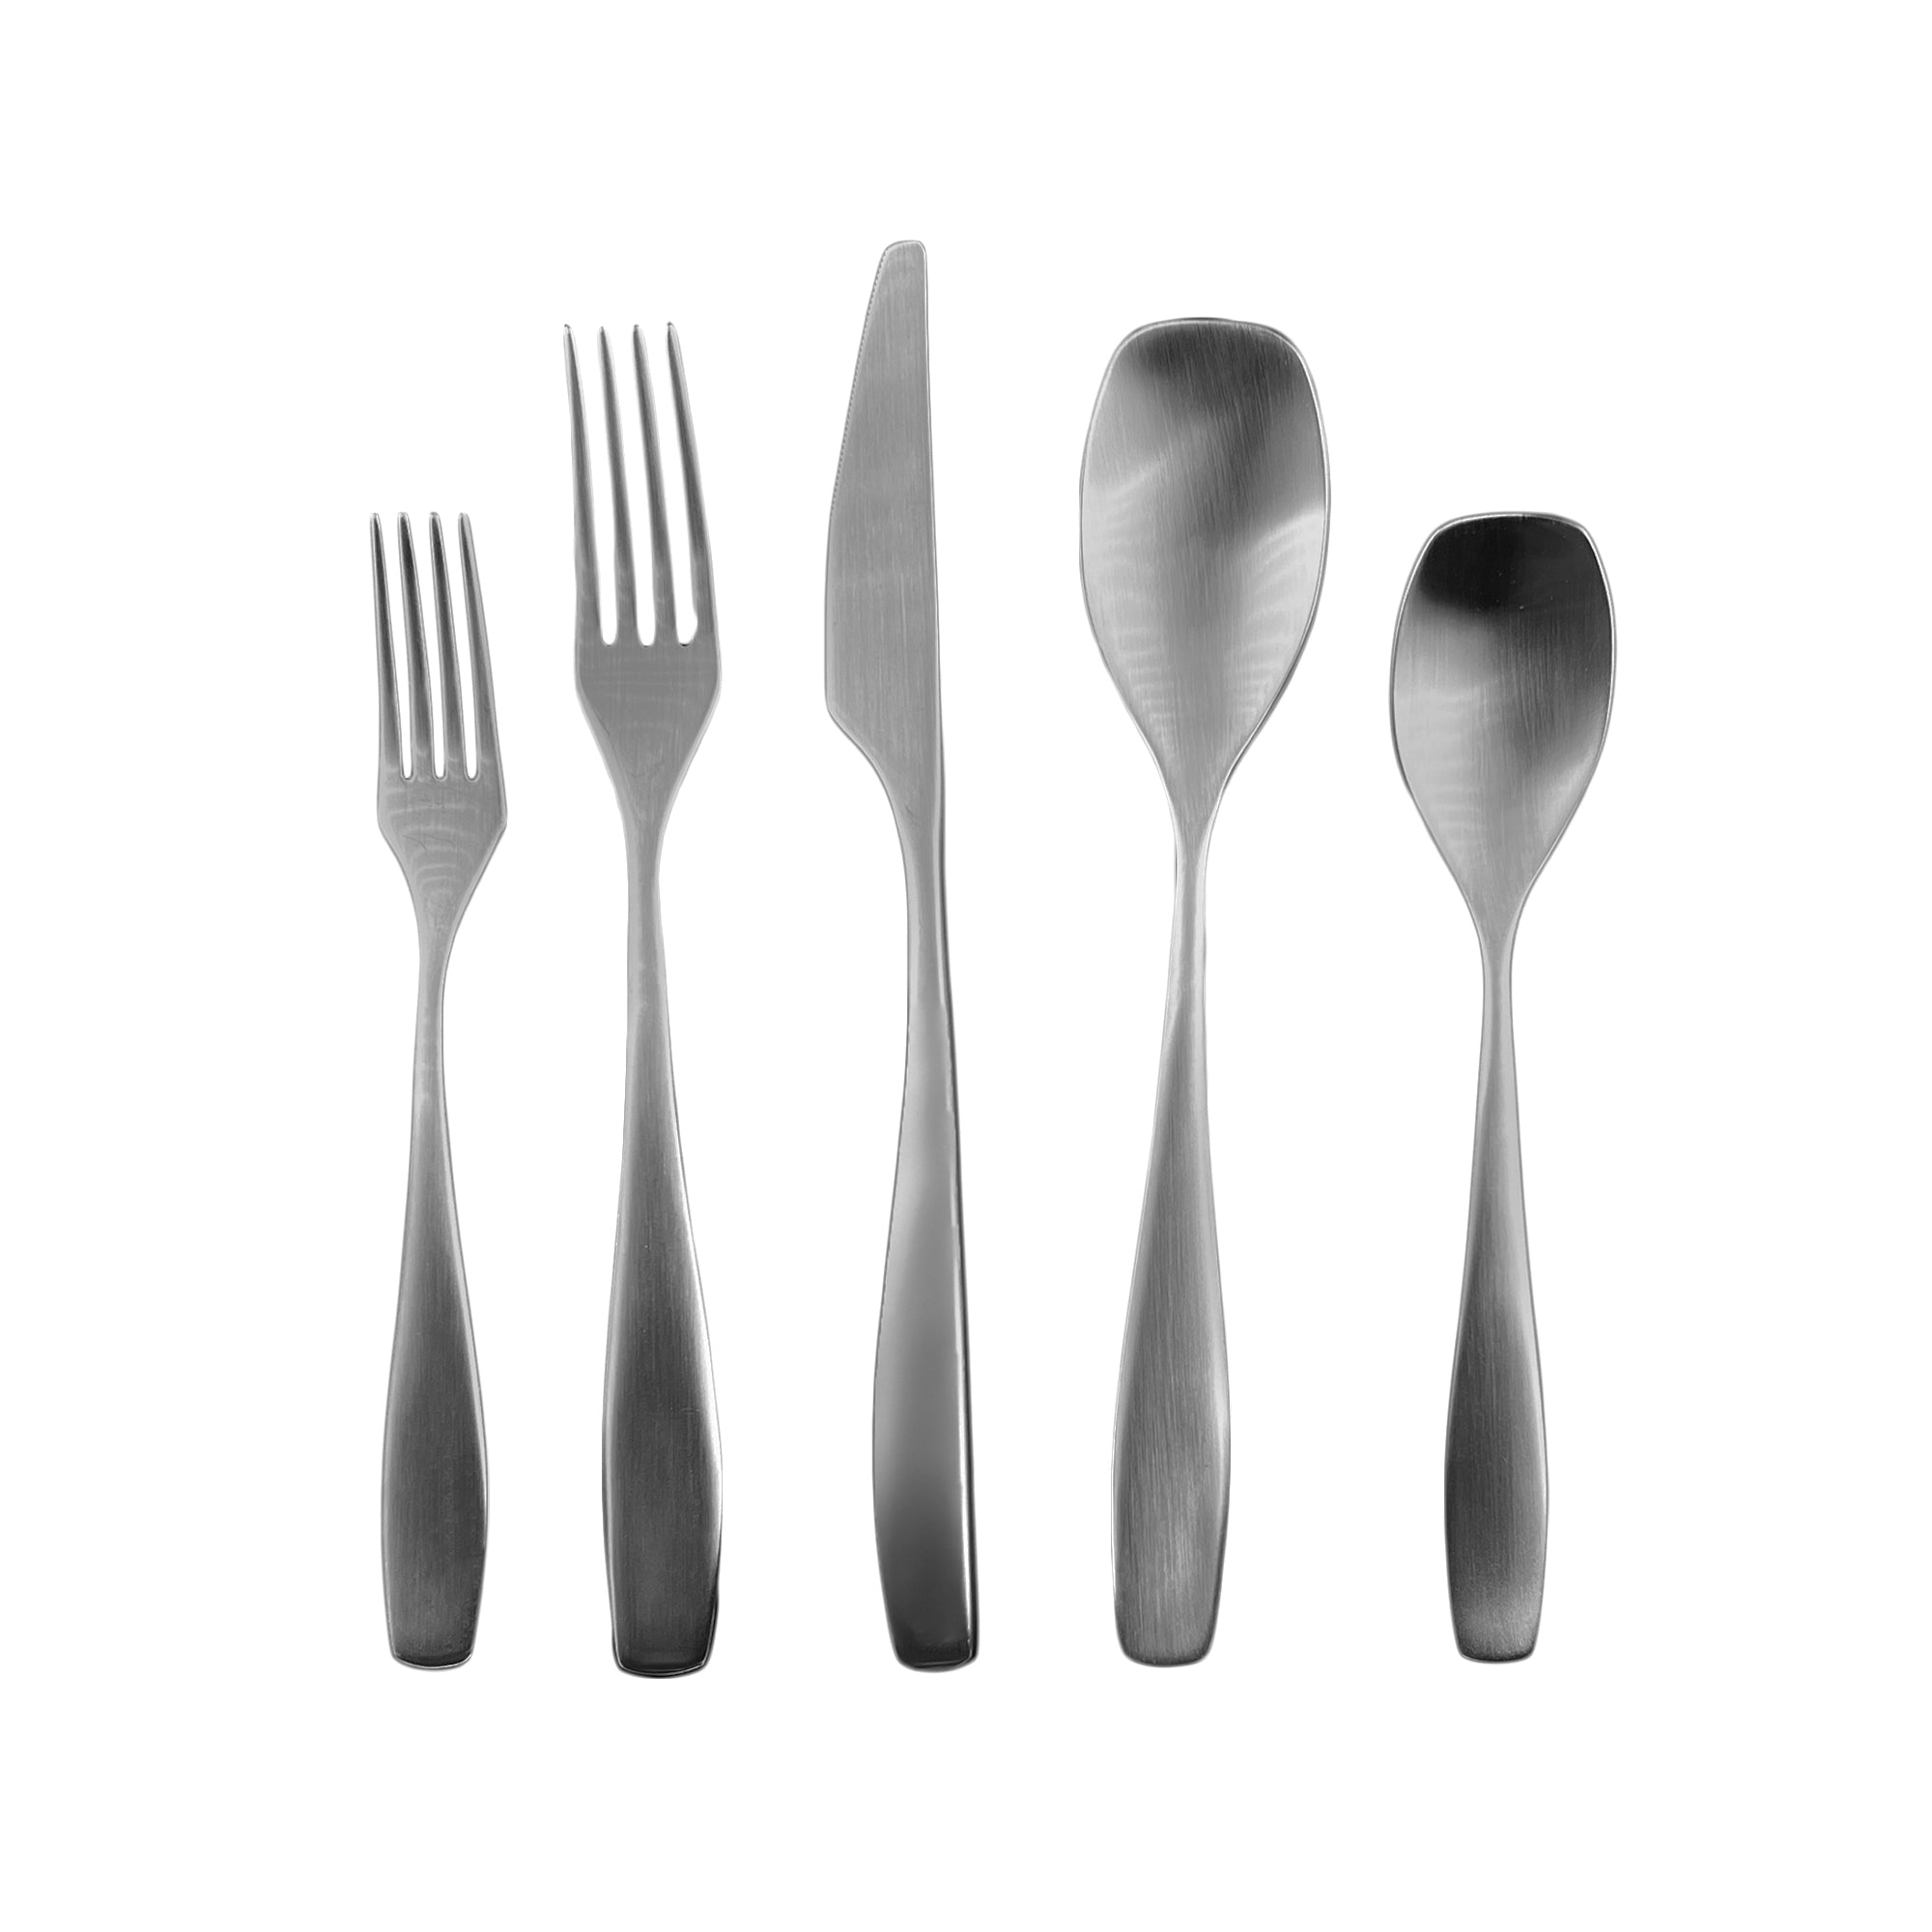 Voss Brushed Stainless Steel 5 Piece Cutlery Set - Service For 1